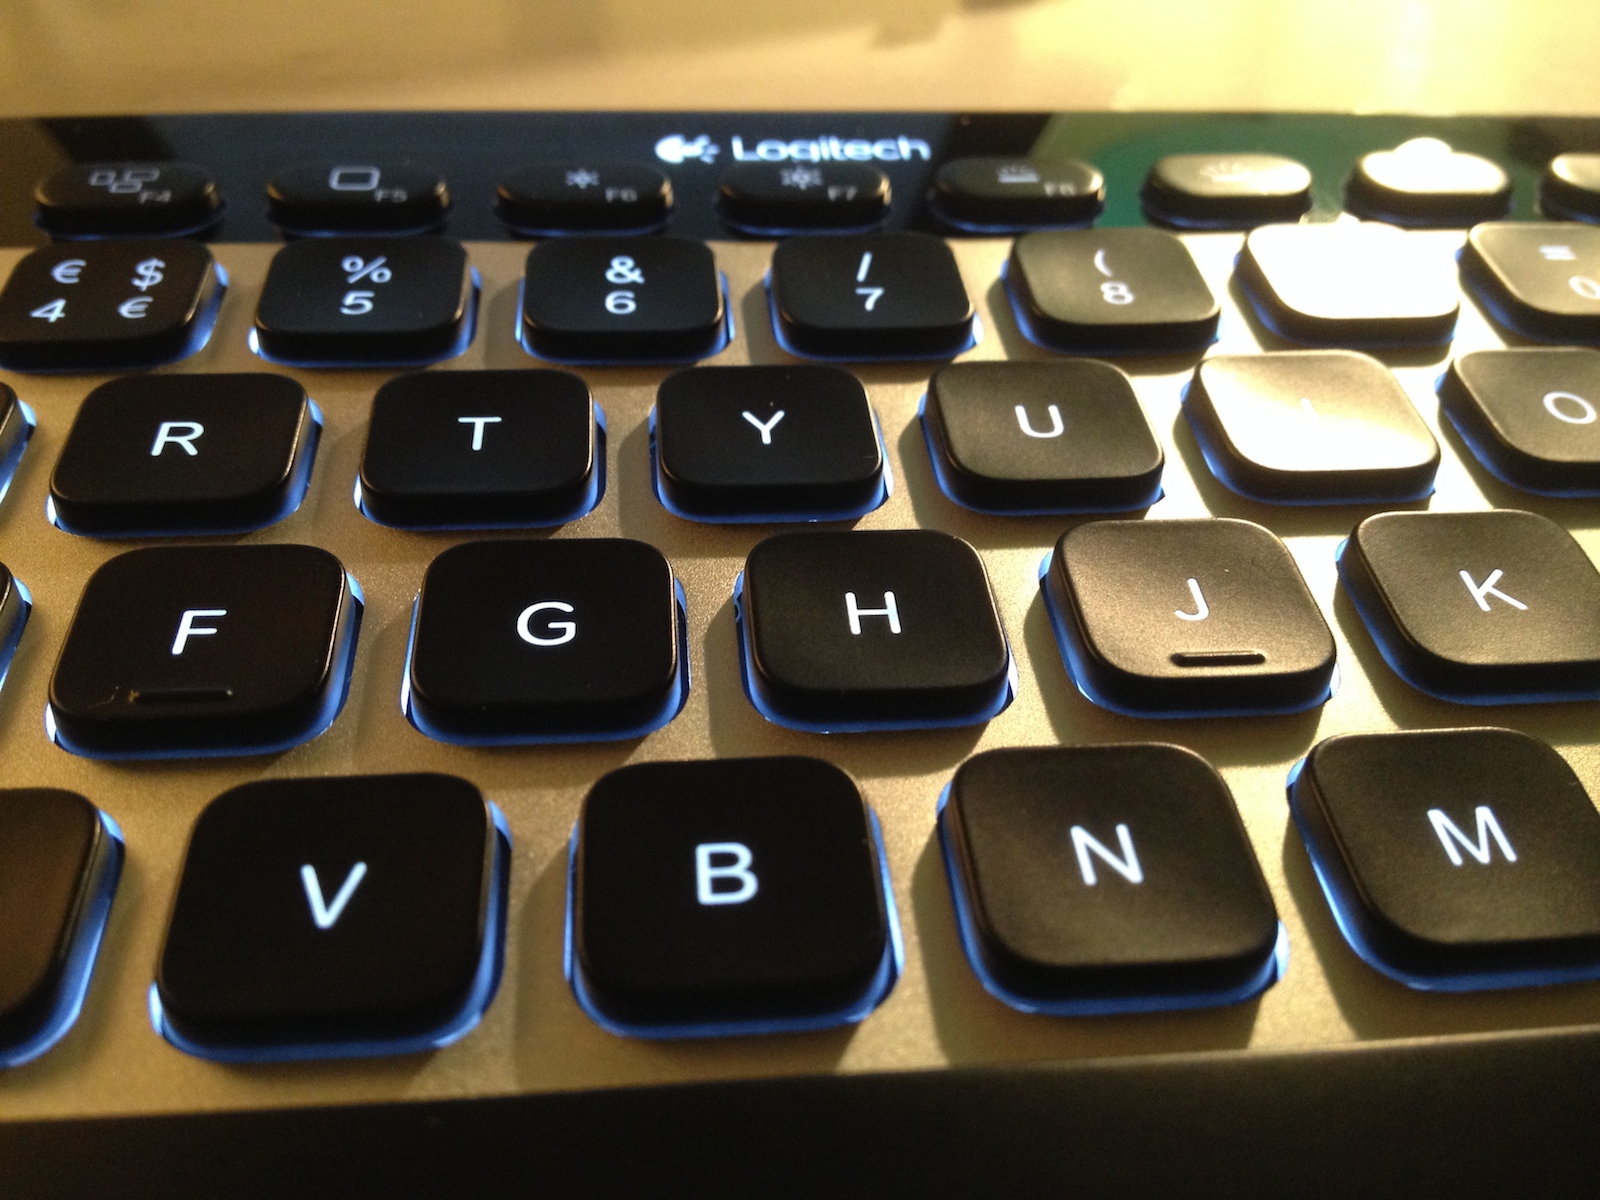 Logitech K811 keyboard with backlight active